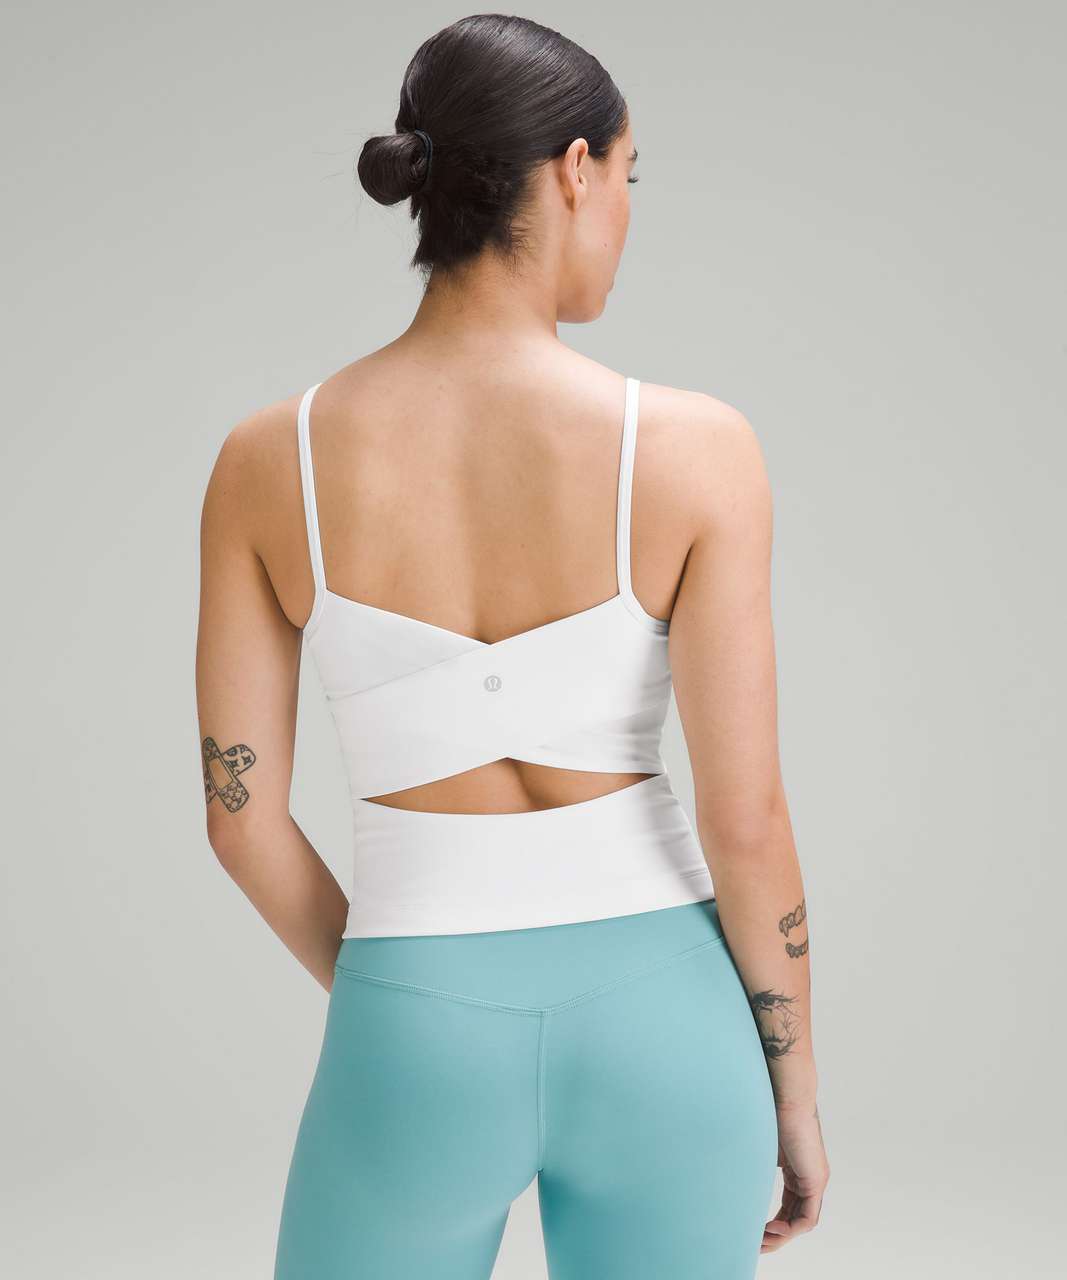 Lululemon Crossback Strappy Athletic Workout Tank Top Built in Bra S Shirt